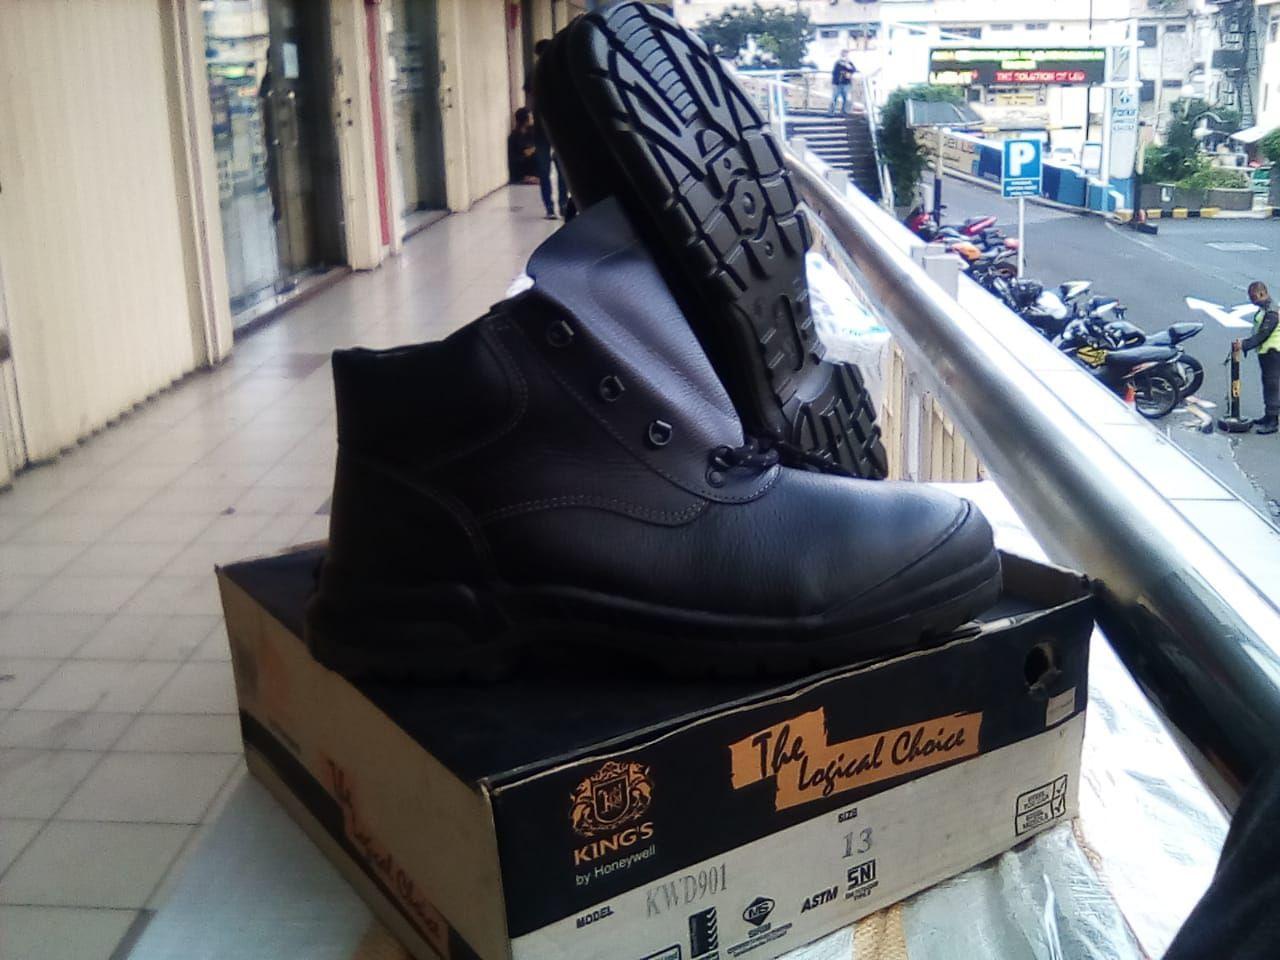 harga safety boots, safety shoes, shoes king, sepatu safety king, sepatu king, harga sepatu safety king, sepatu septi king, harga safety shoes, harga sepatu king, safety shoes king